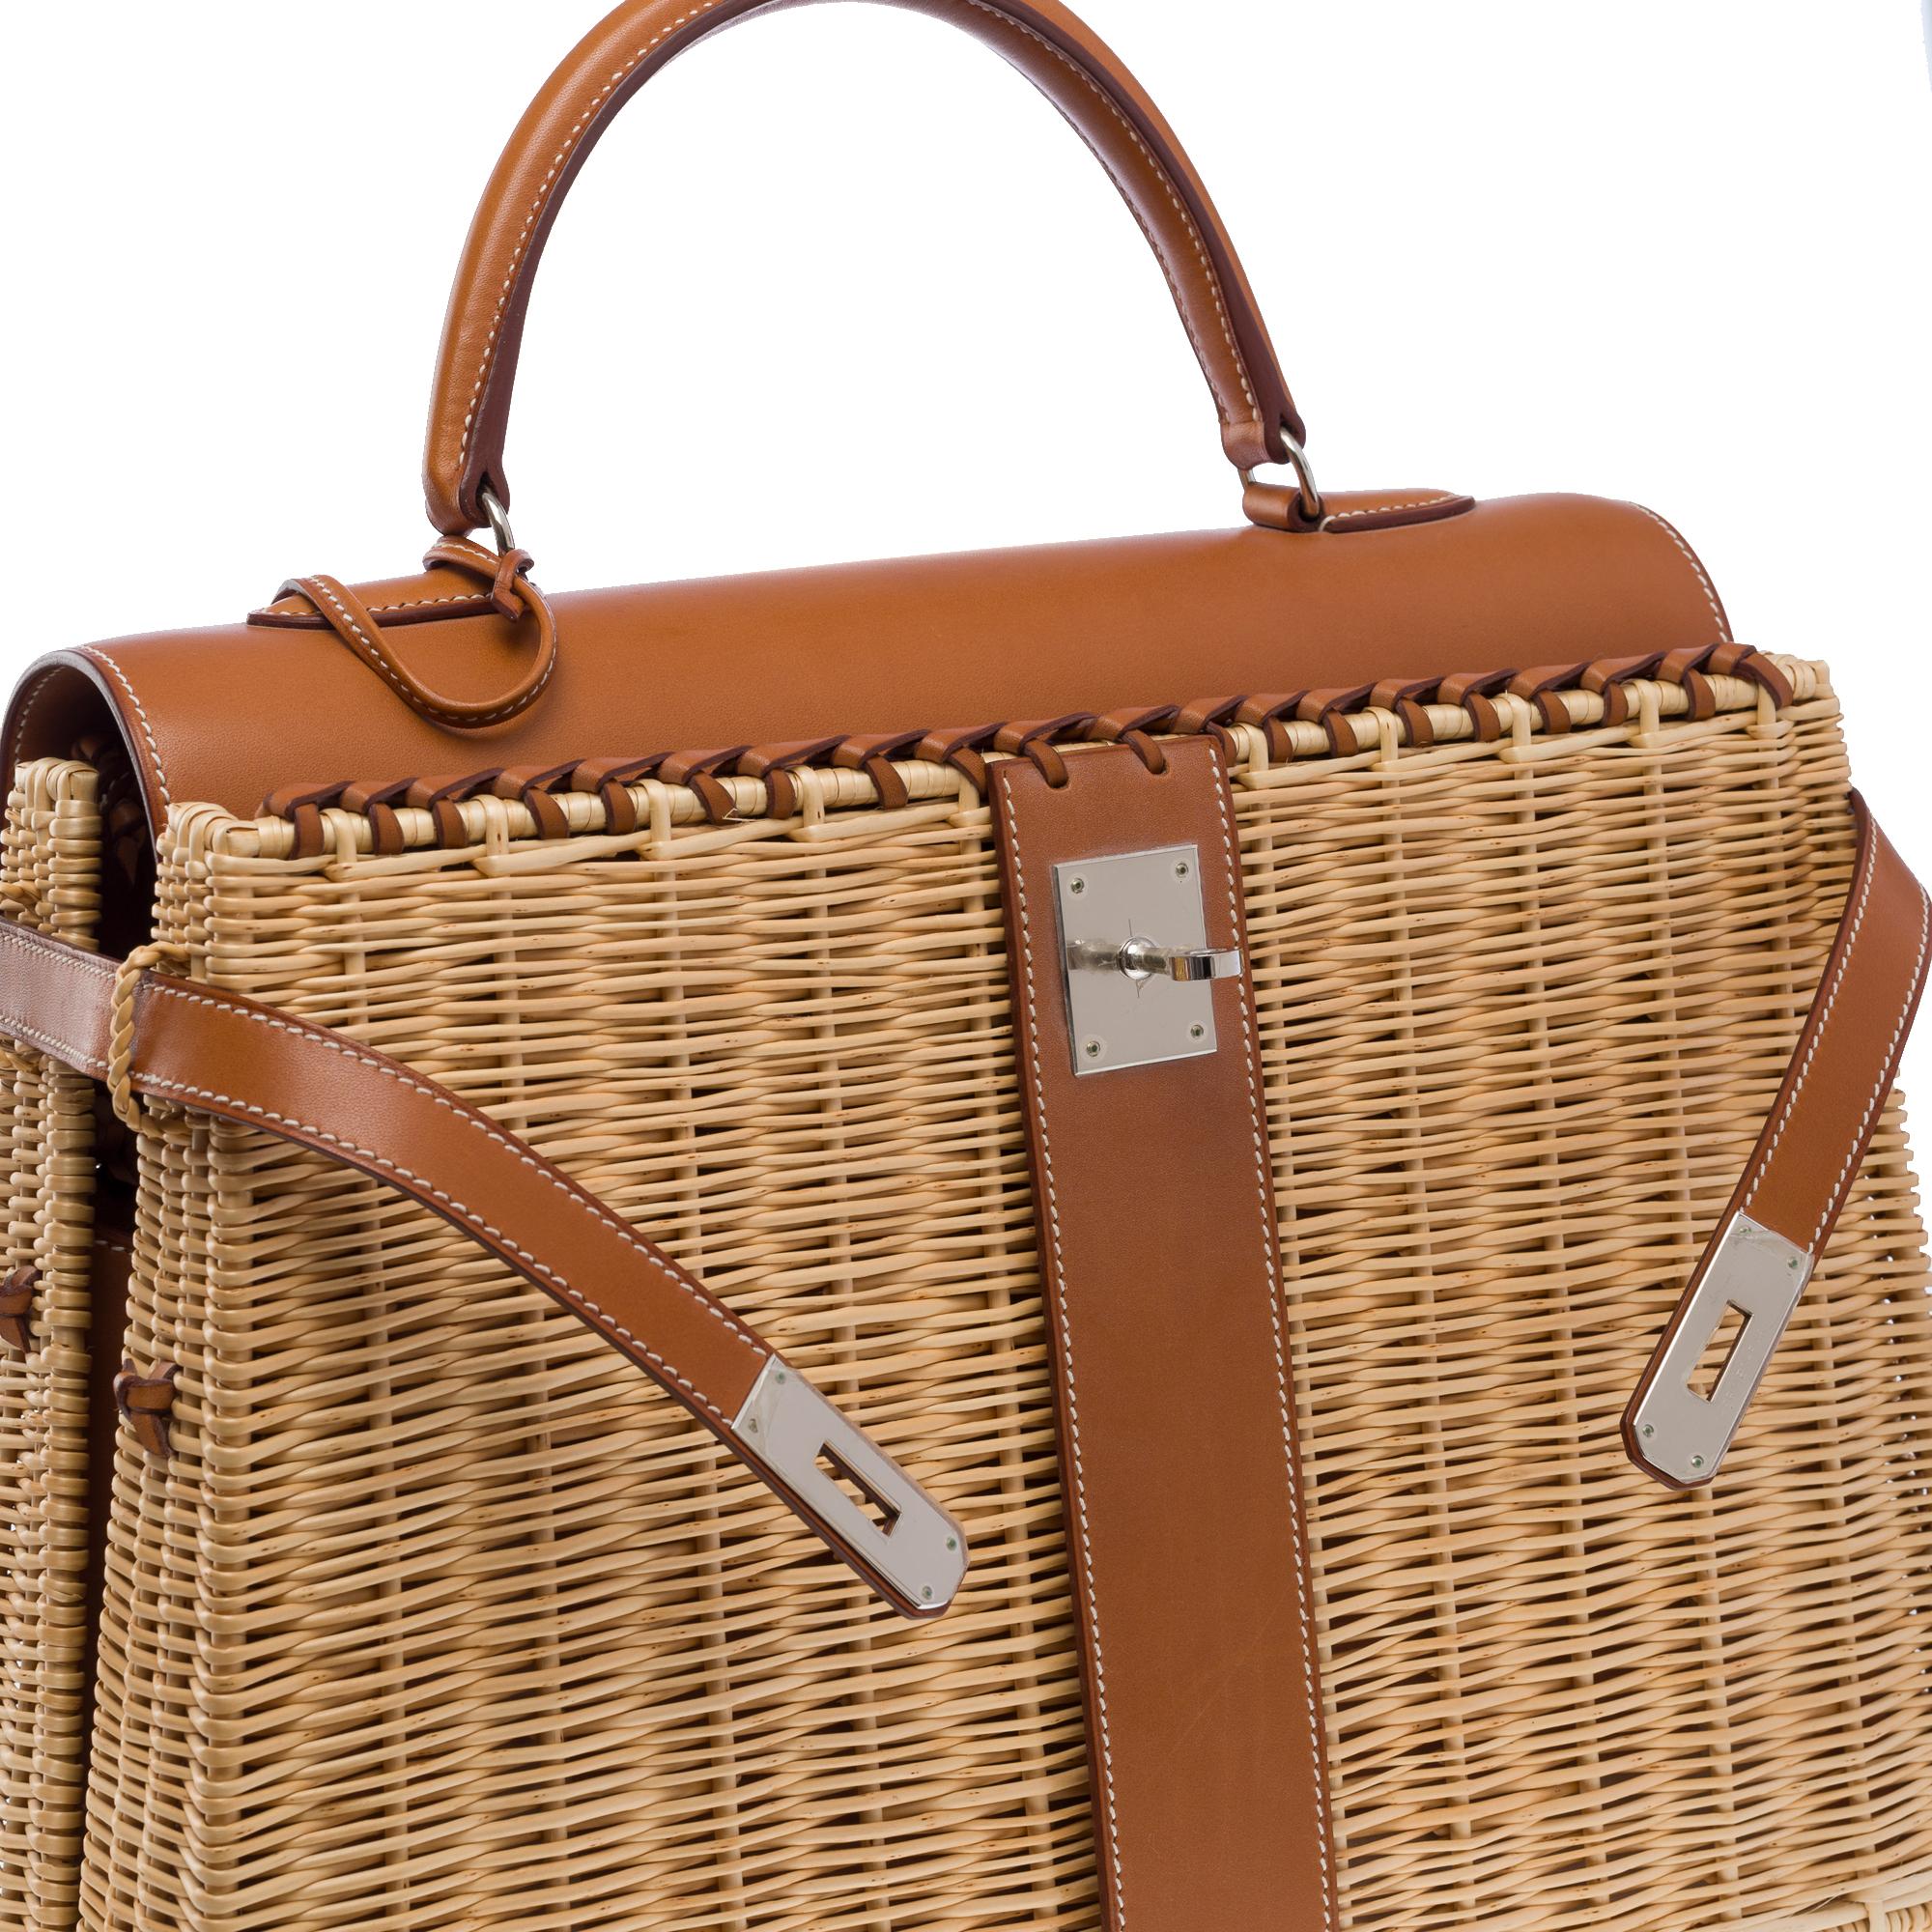 Rare Hermes Kelly 35 Picnic in wicker and barenia leather , SHW 3